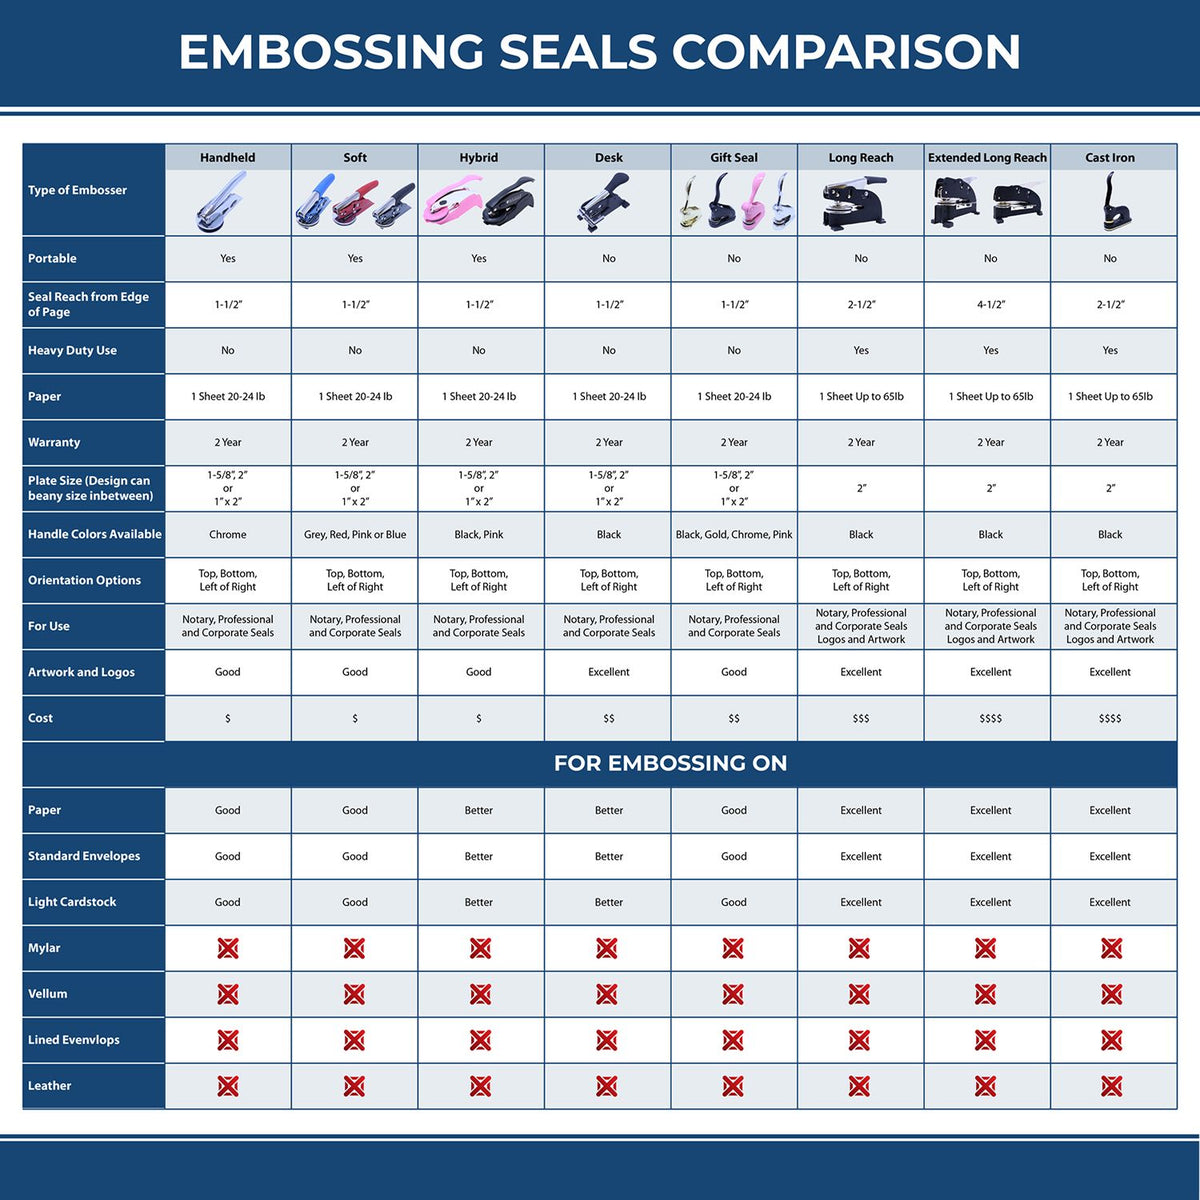 A comparison chart for the different types of mount models available for the State of Pennsylvania Extended Long Reach Engineer Seal.